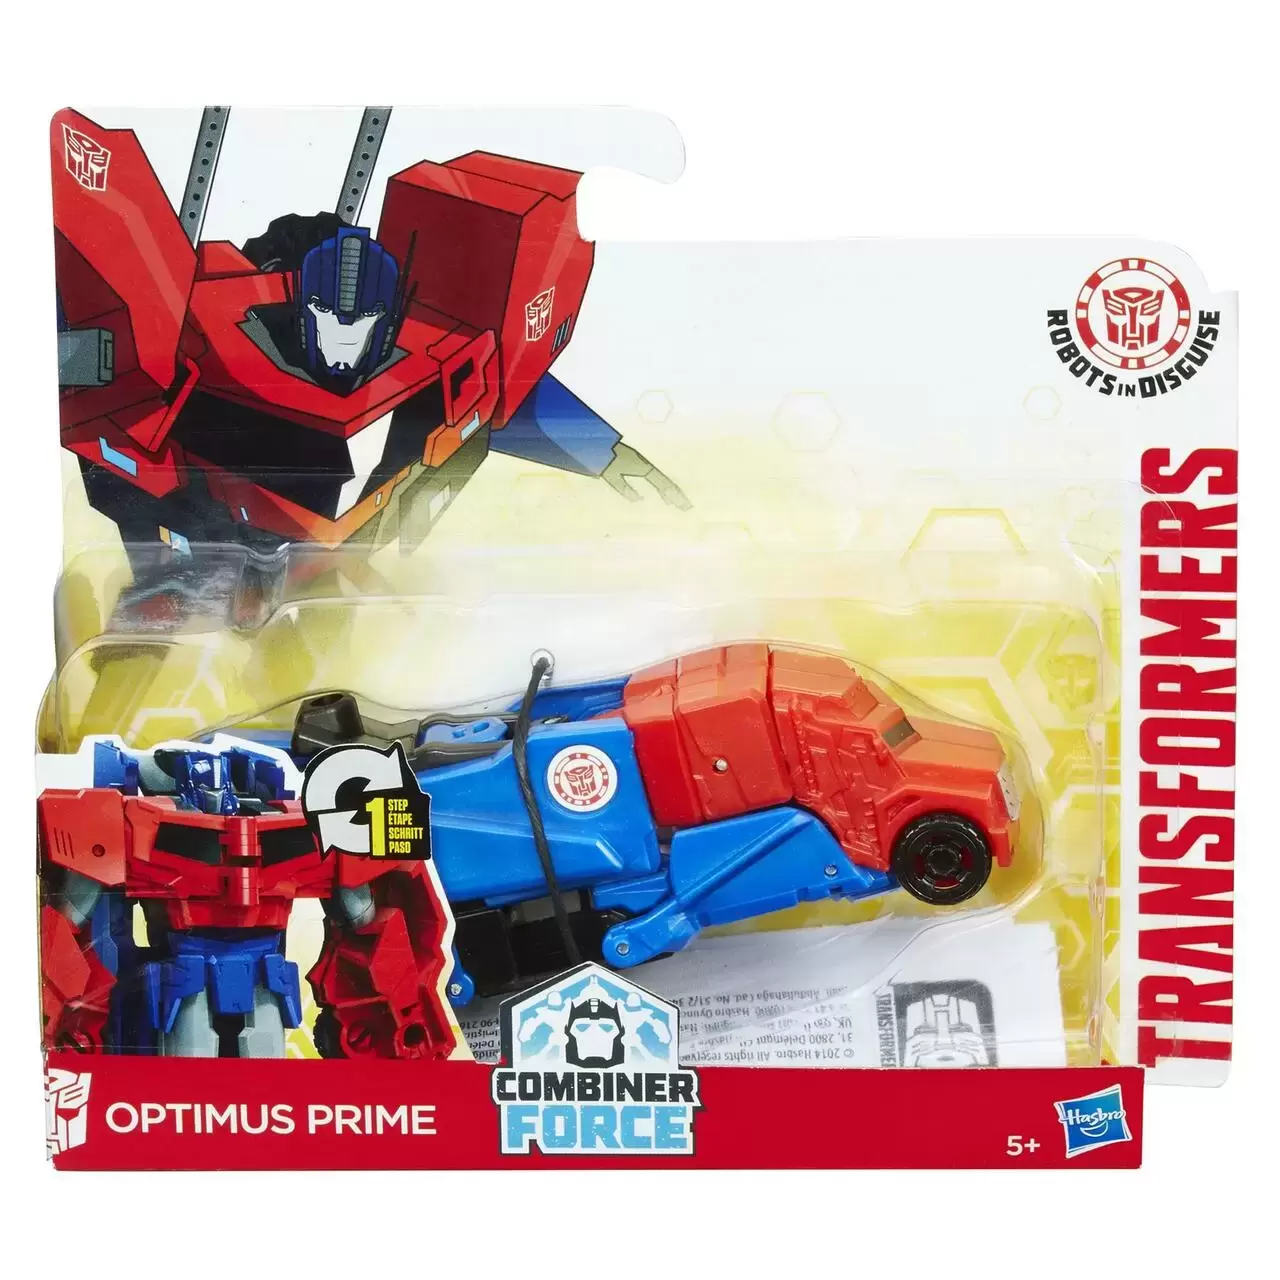 Transformers Prime Robots in Disguise Weaponizer Optimus Prime